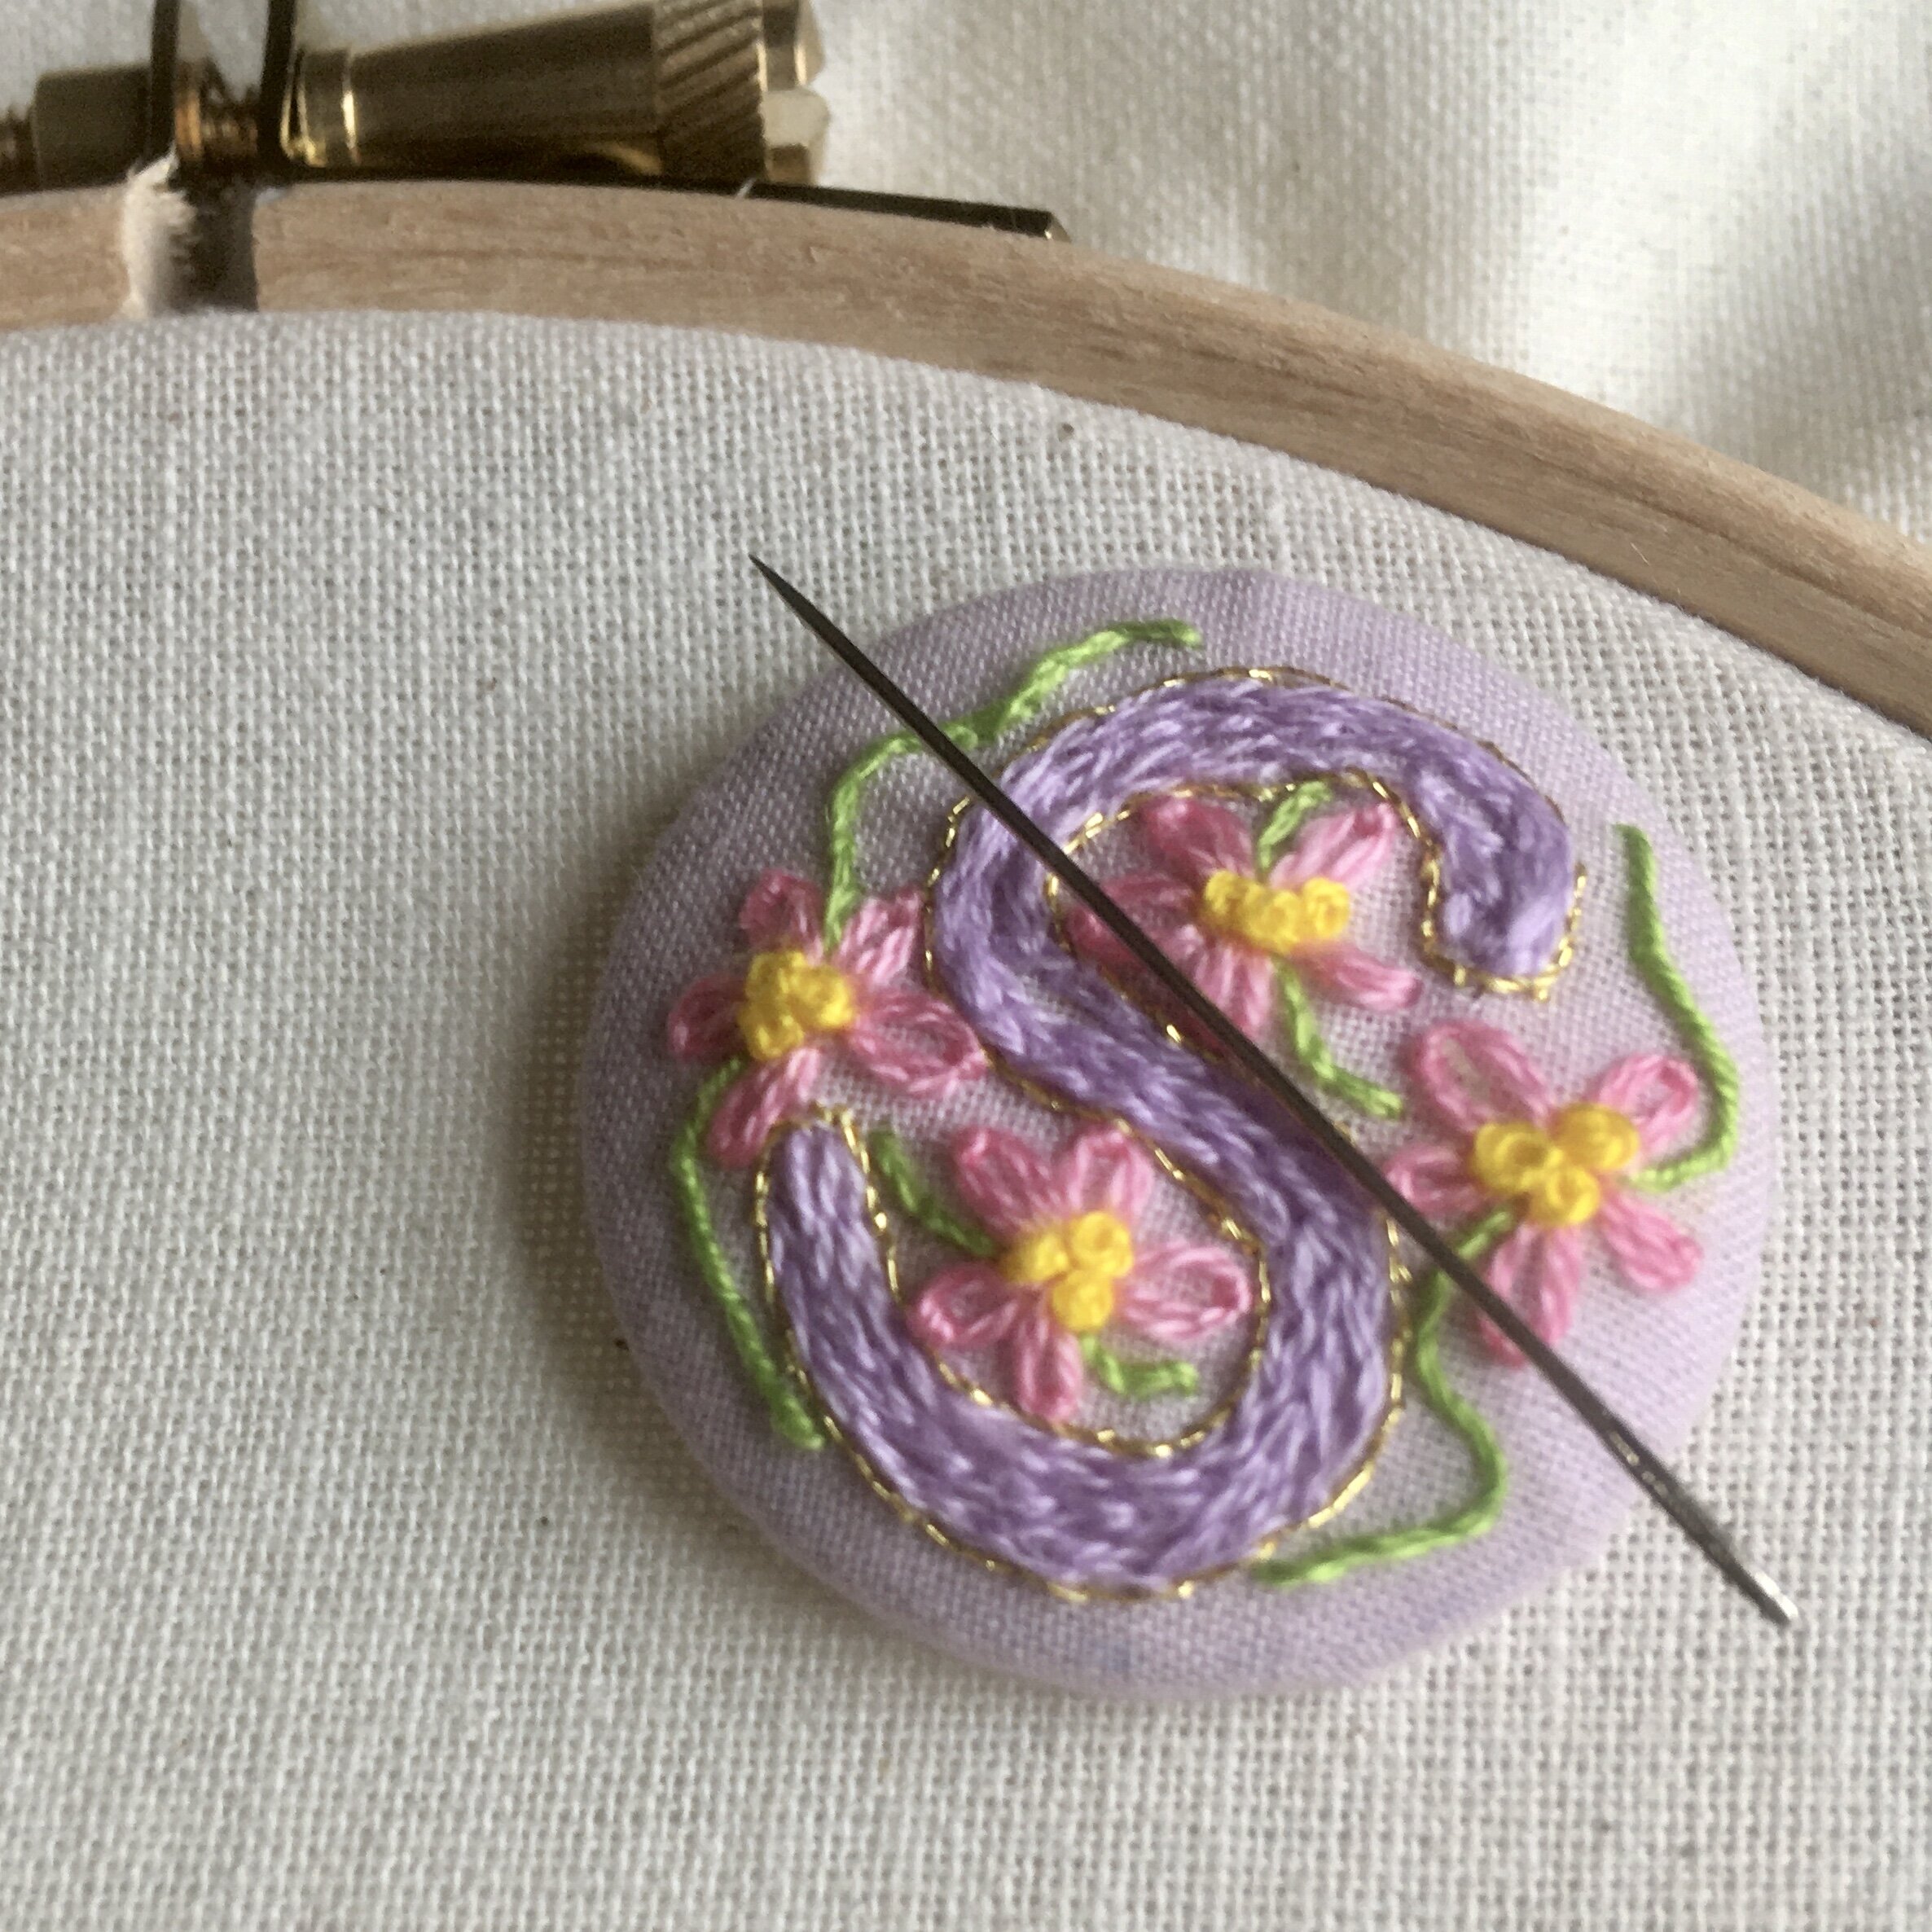 Life is Short, Buy the Canvas! Needle Minder Magnet --Gift for Stitchers